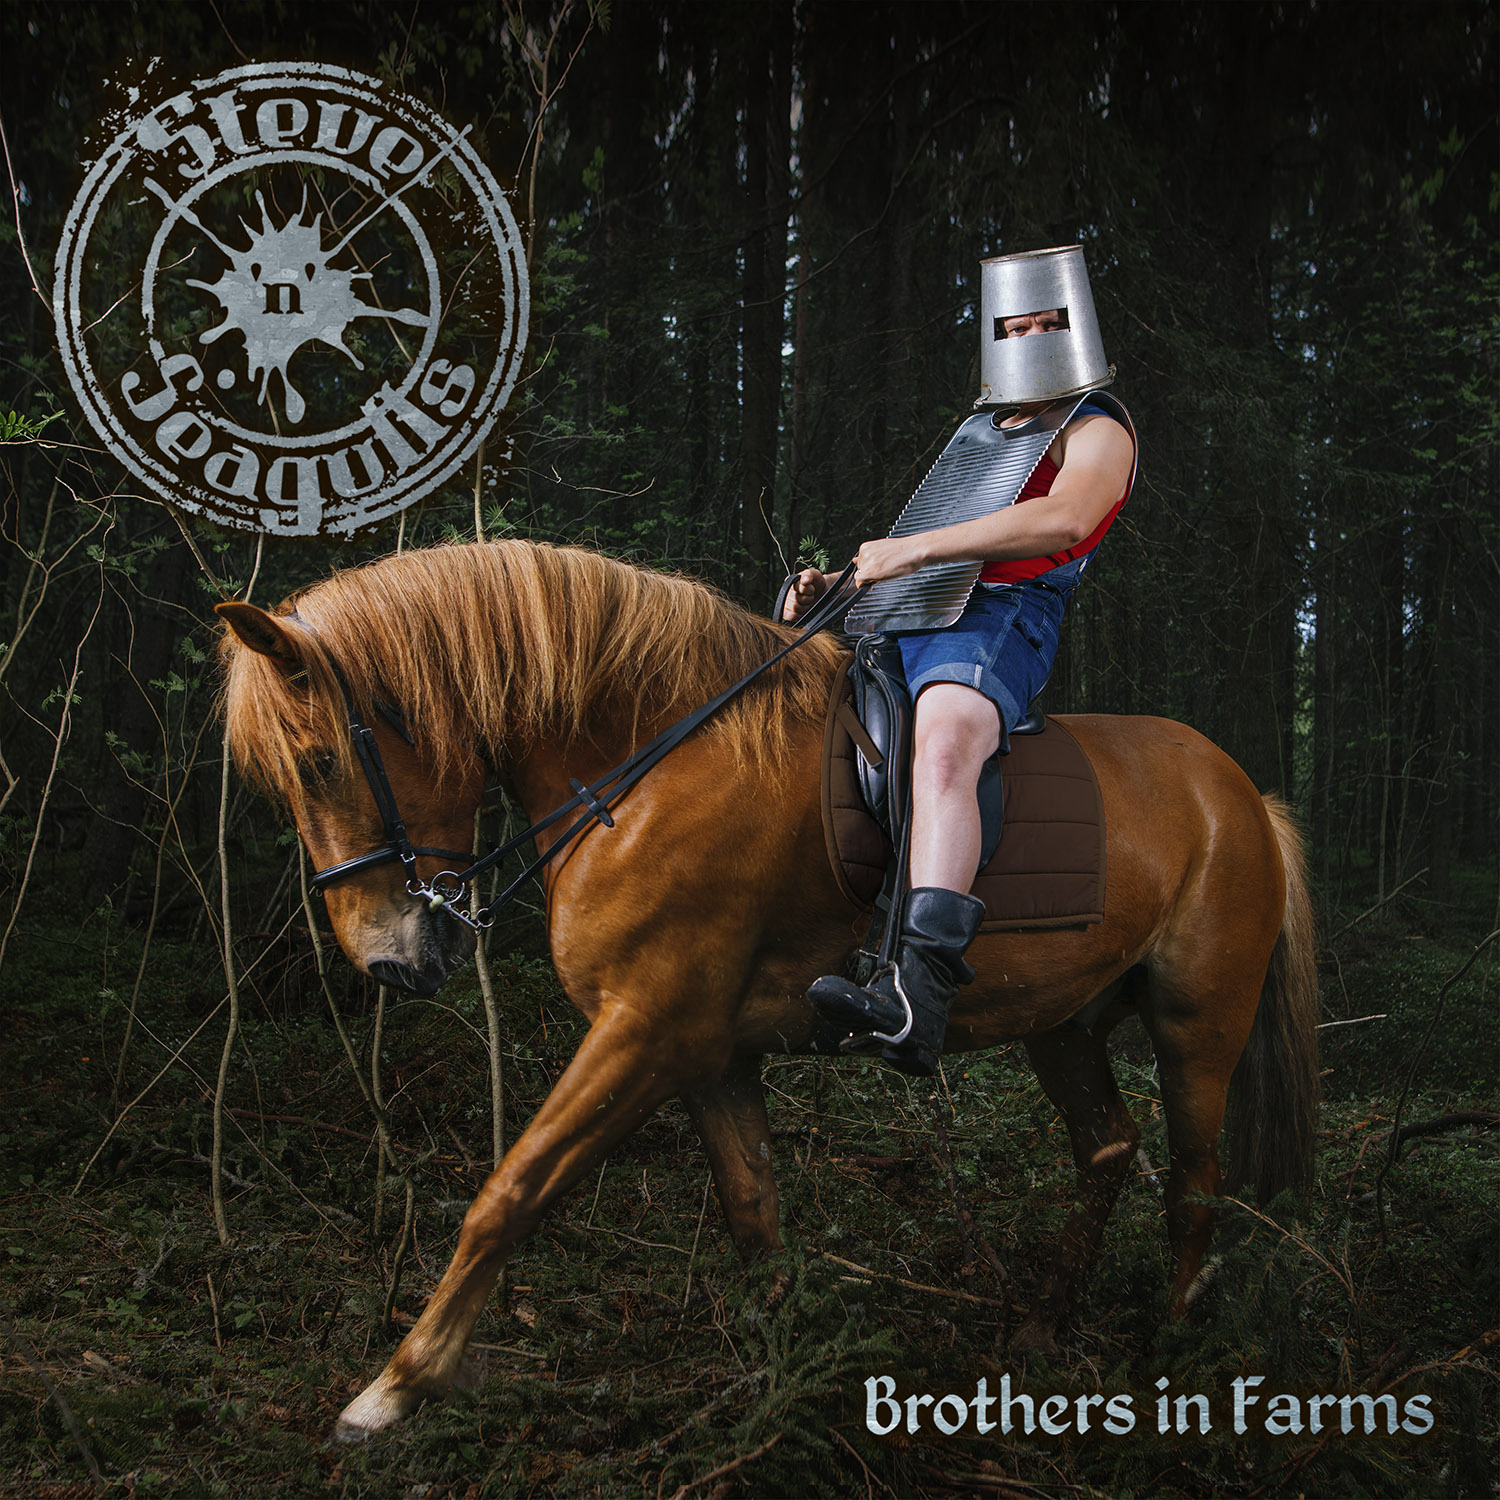 Brothers in Farms – Steve’N’Seagulls